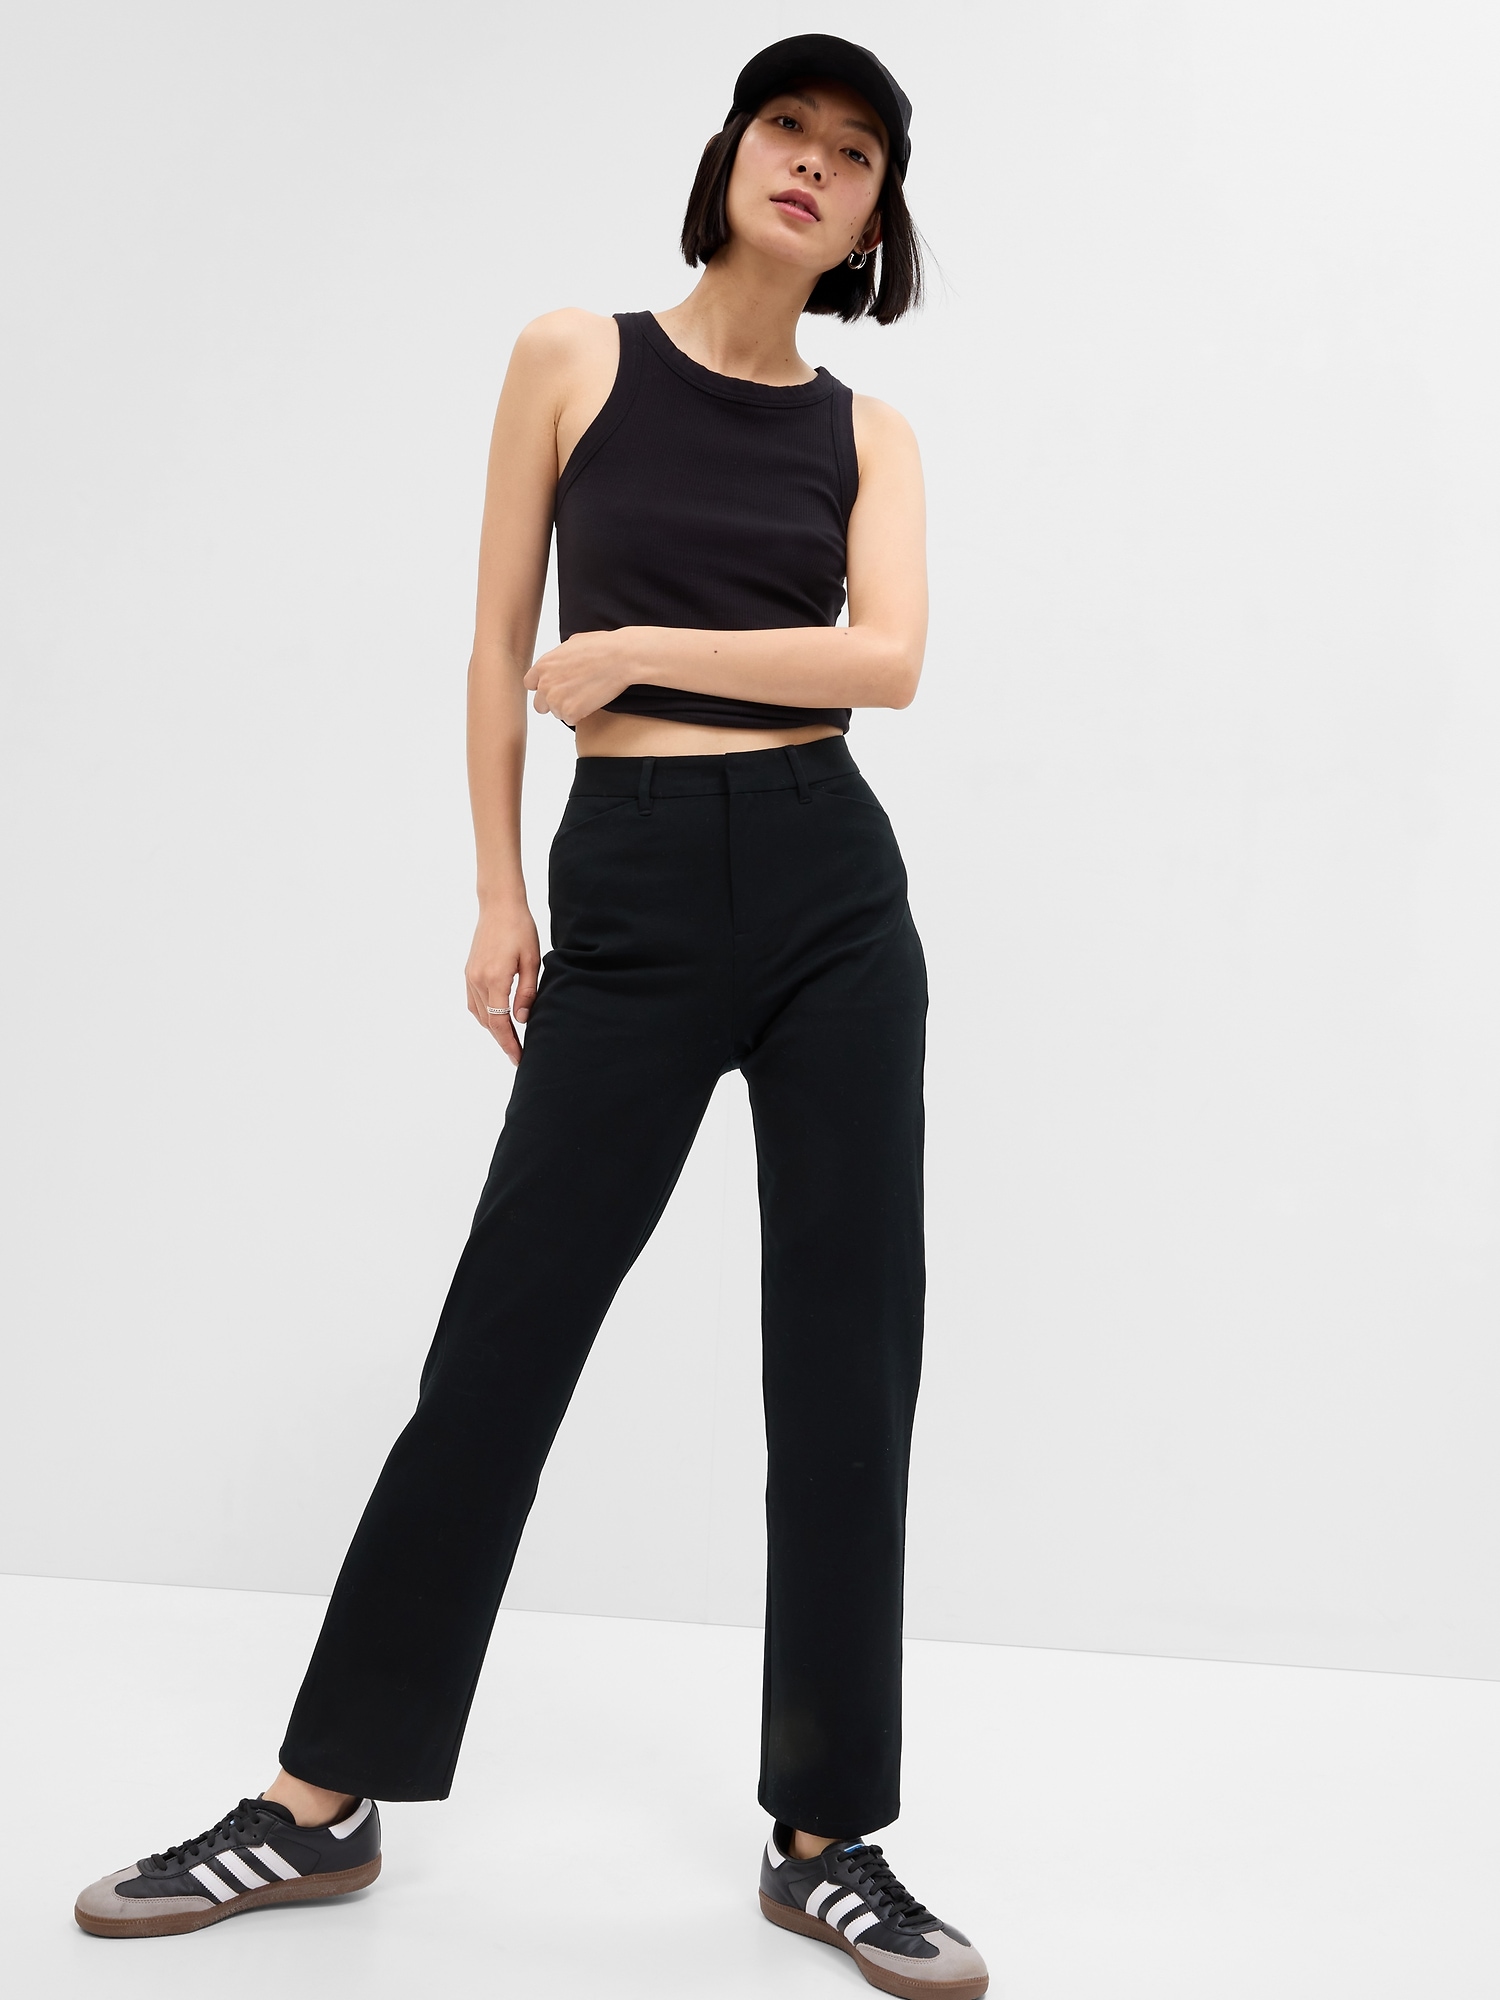 Mid Rise Trousers - Buy Mid Rise Trousers online in India